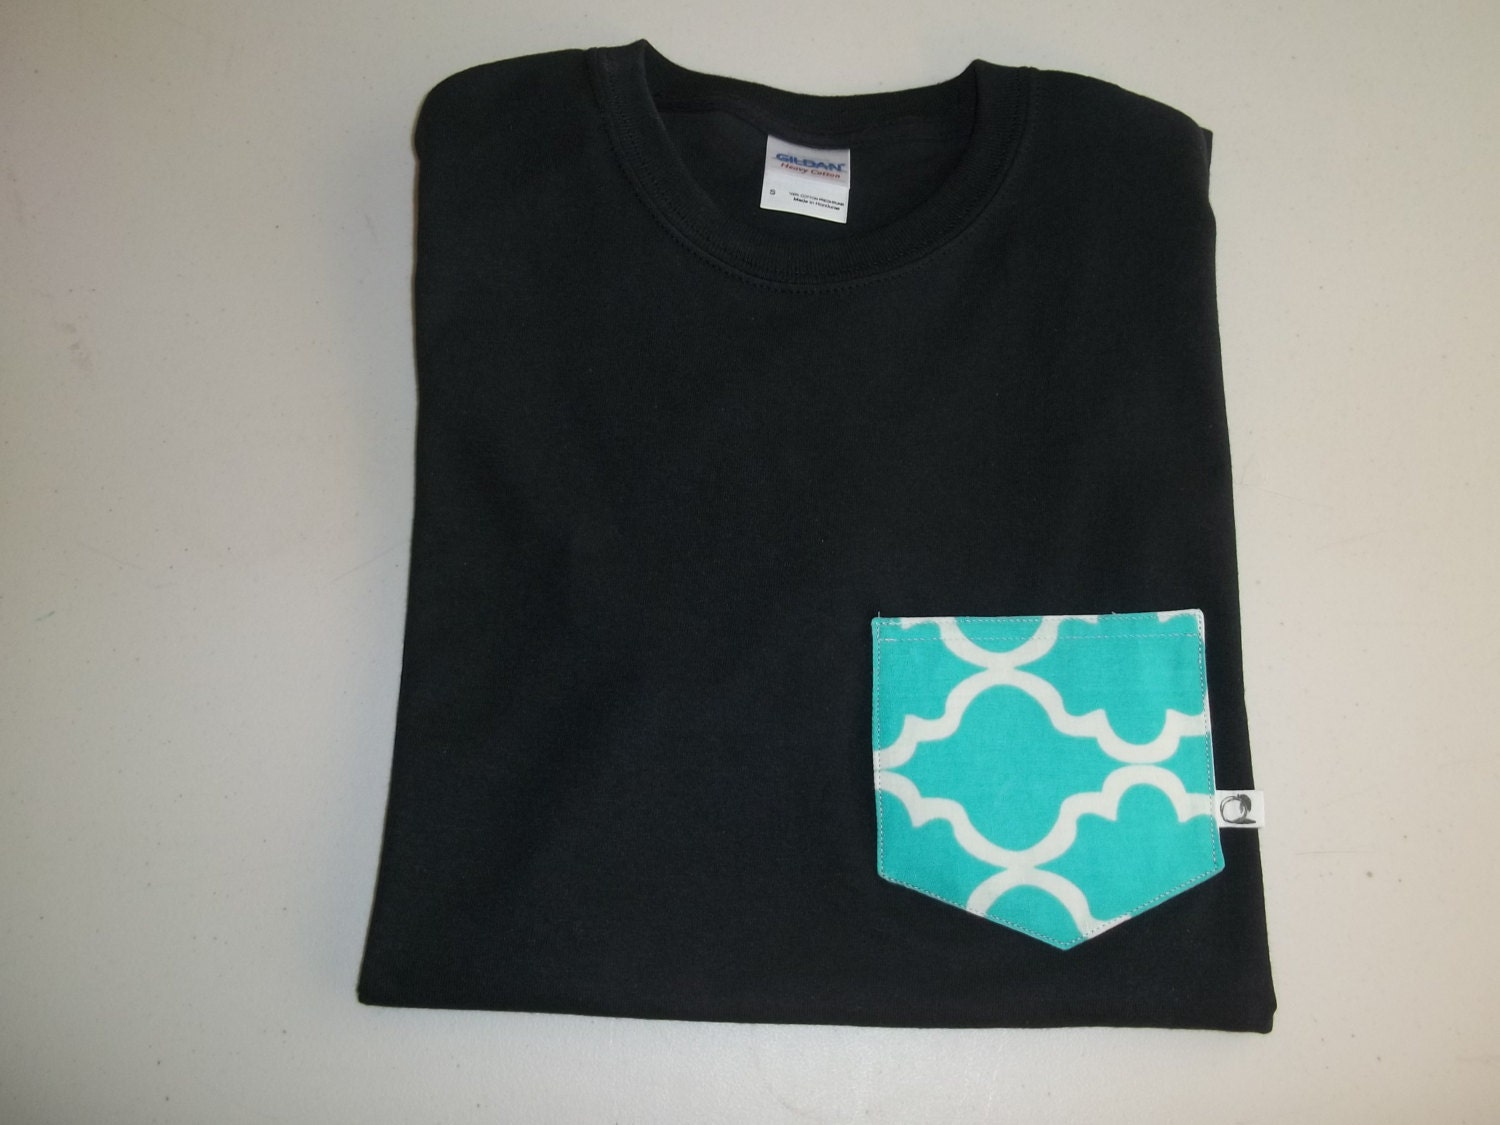 Teal Breeze T-shirt by SouthernPeachCompany on Etsy